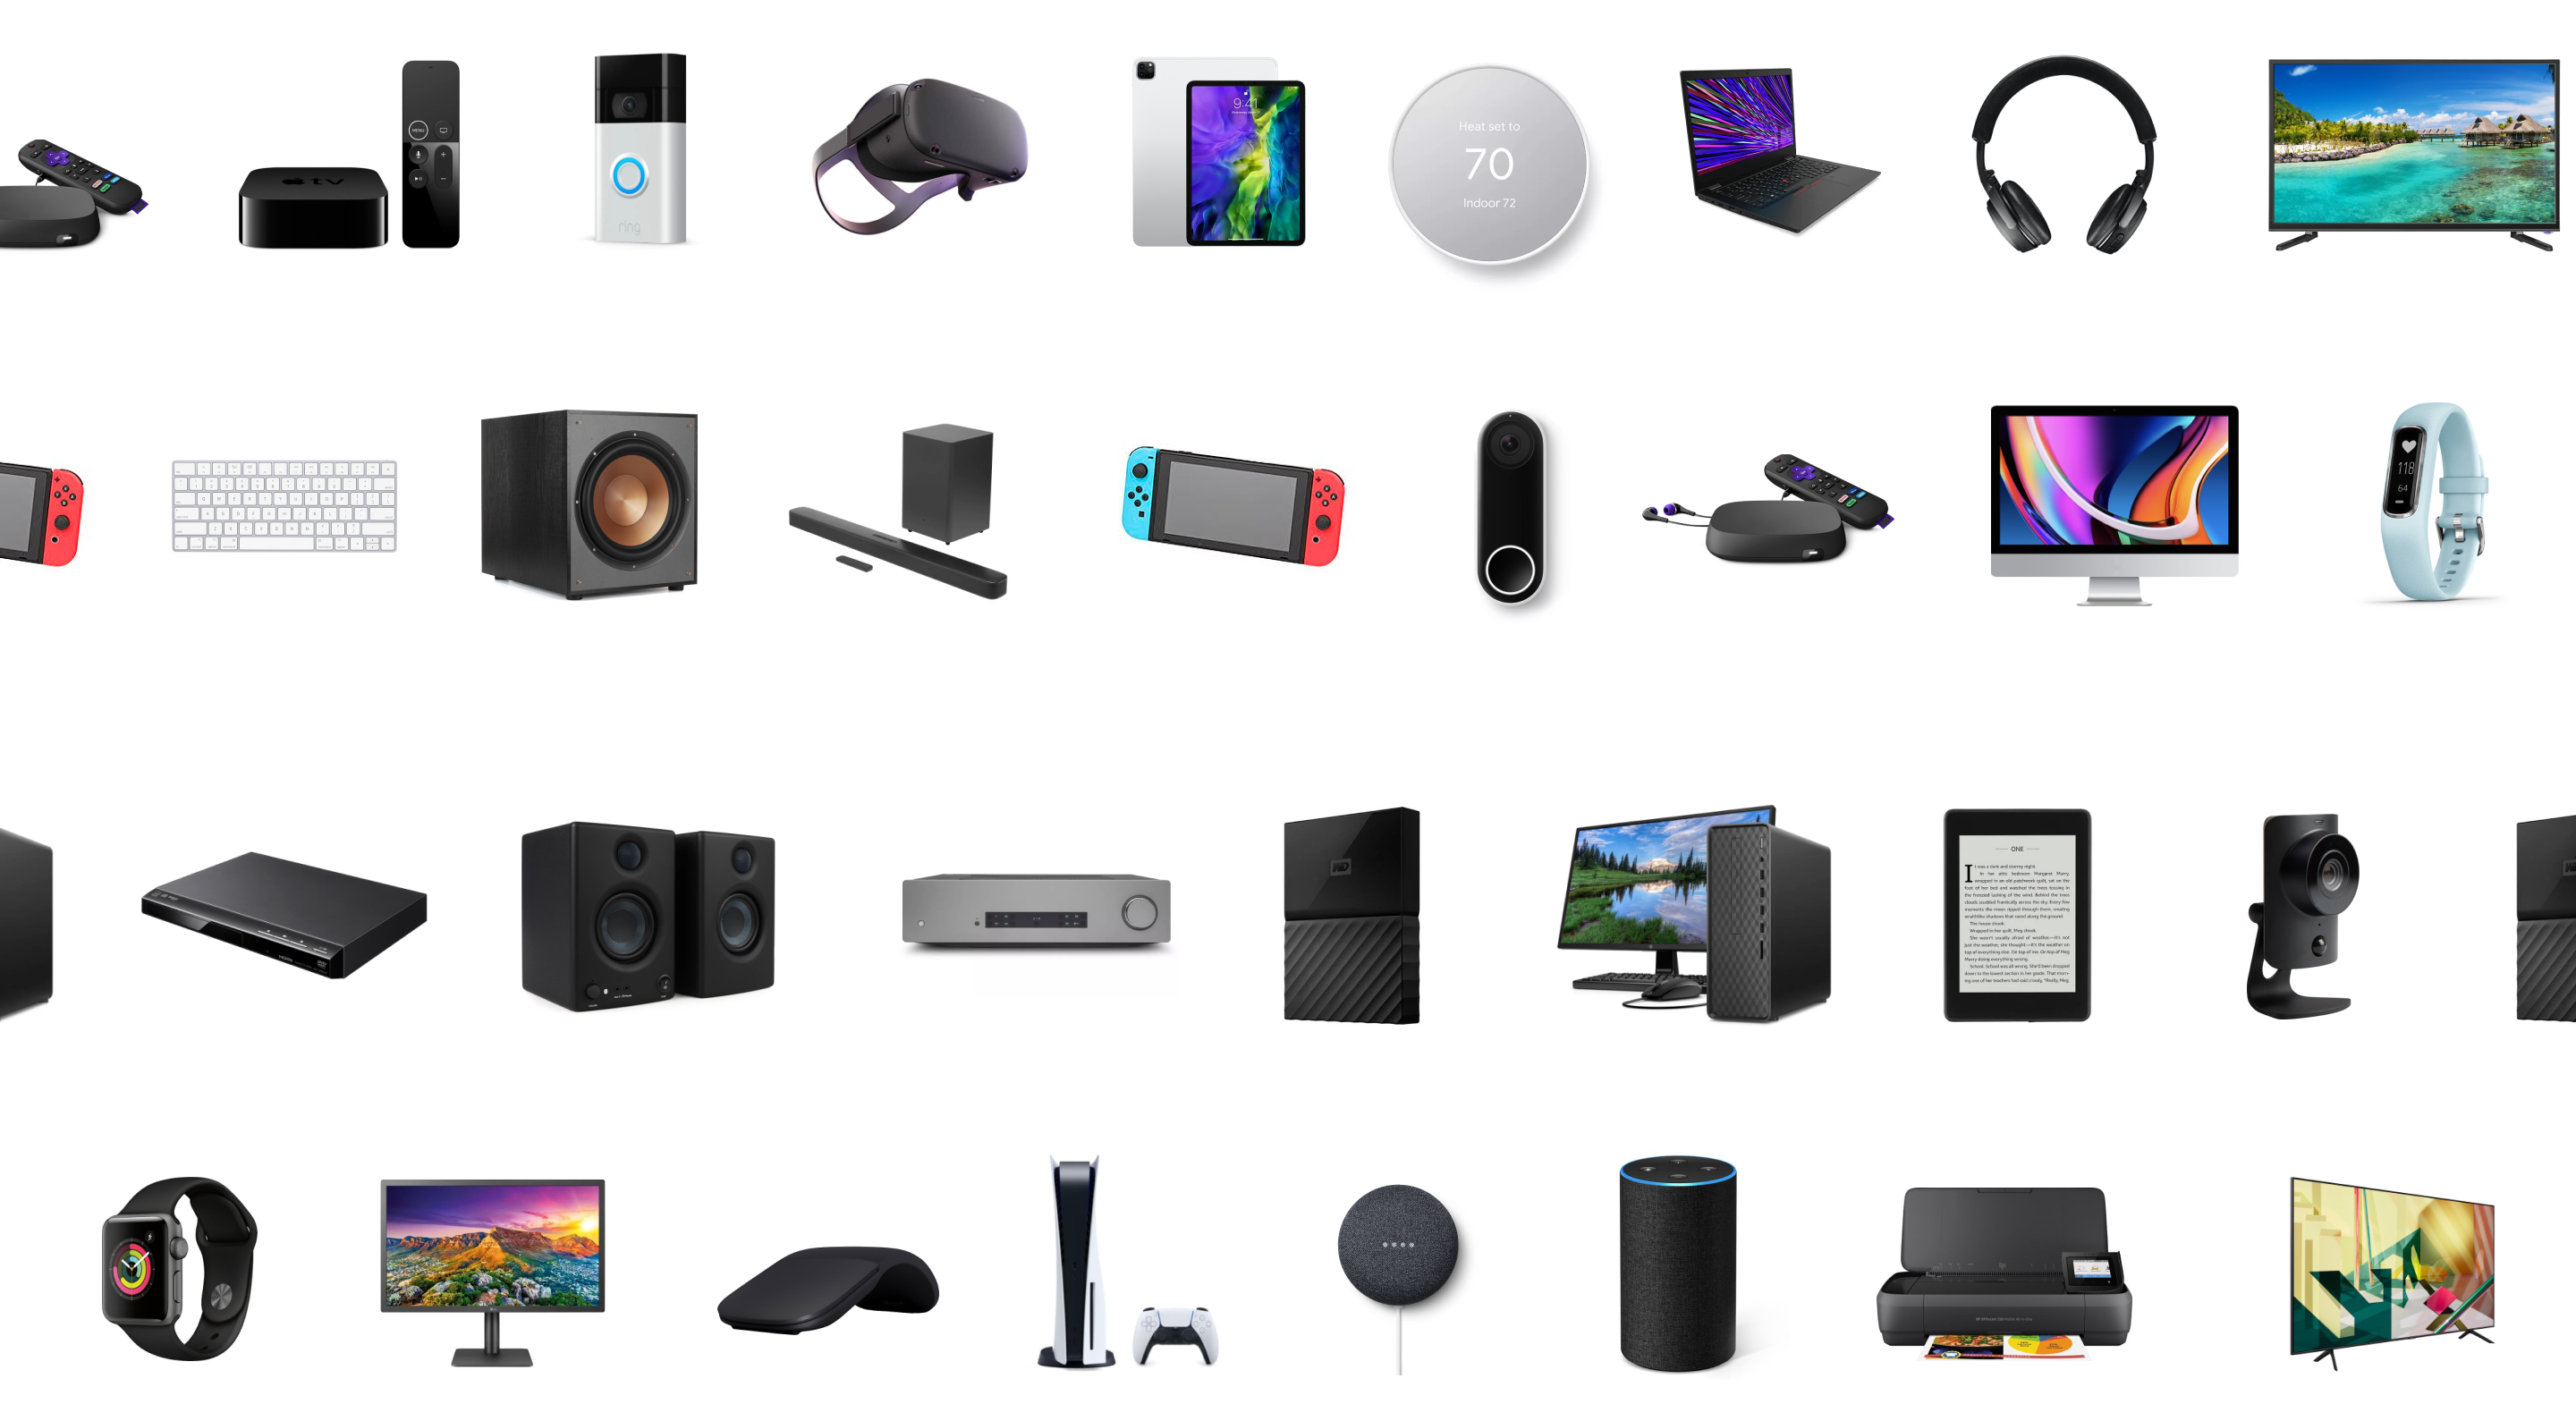 Thousands of devices